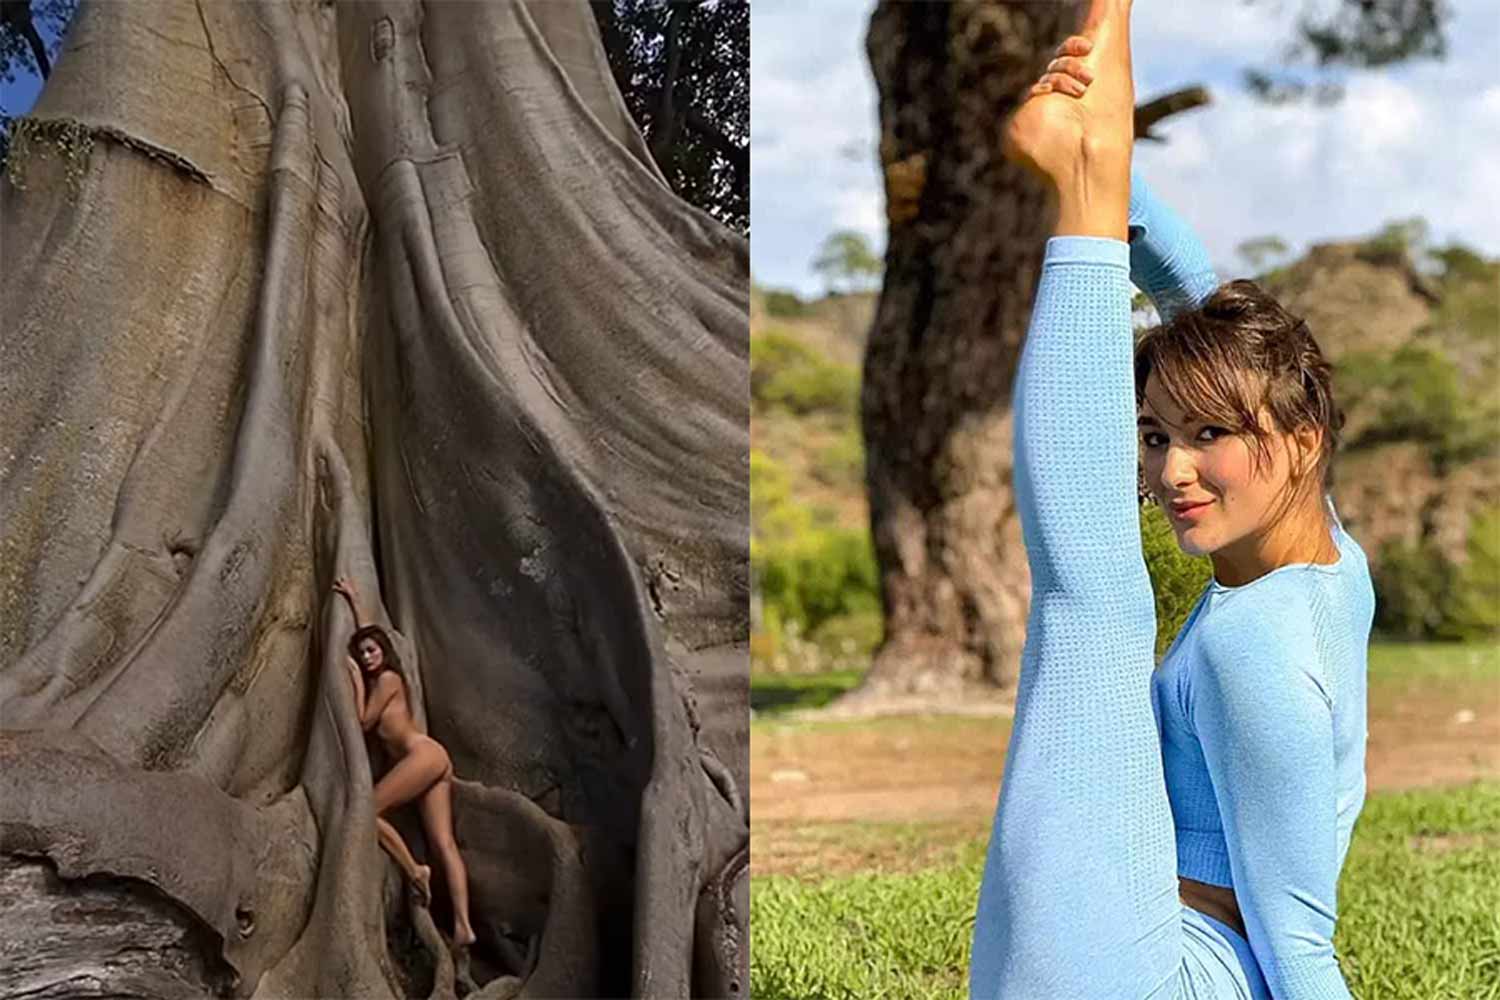 Influencer Allegedly Facing Pornography Charges Over Tree Hugging Photoshoot In Bali